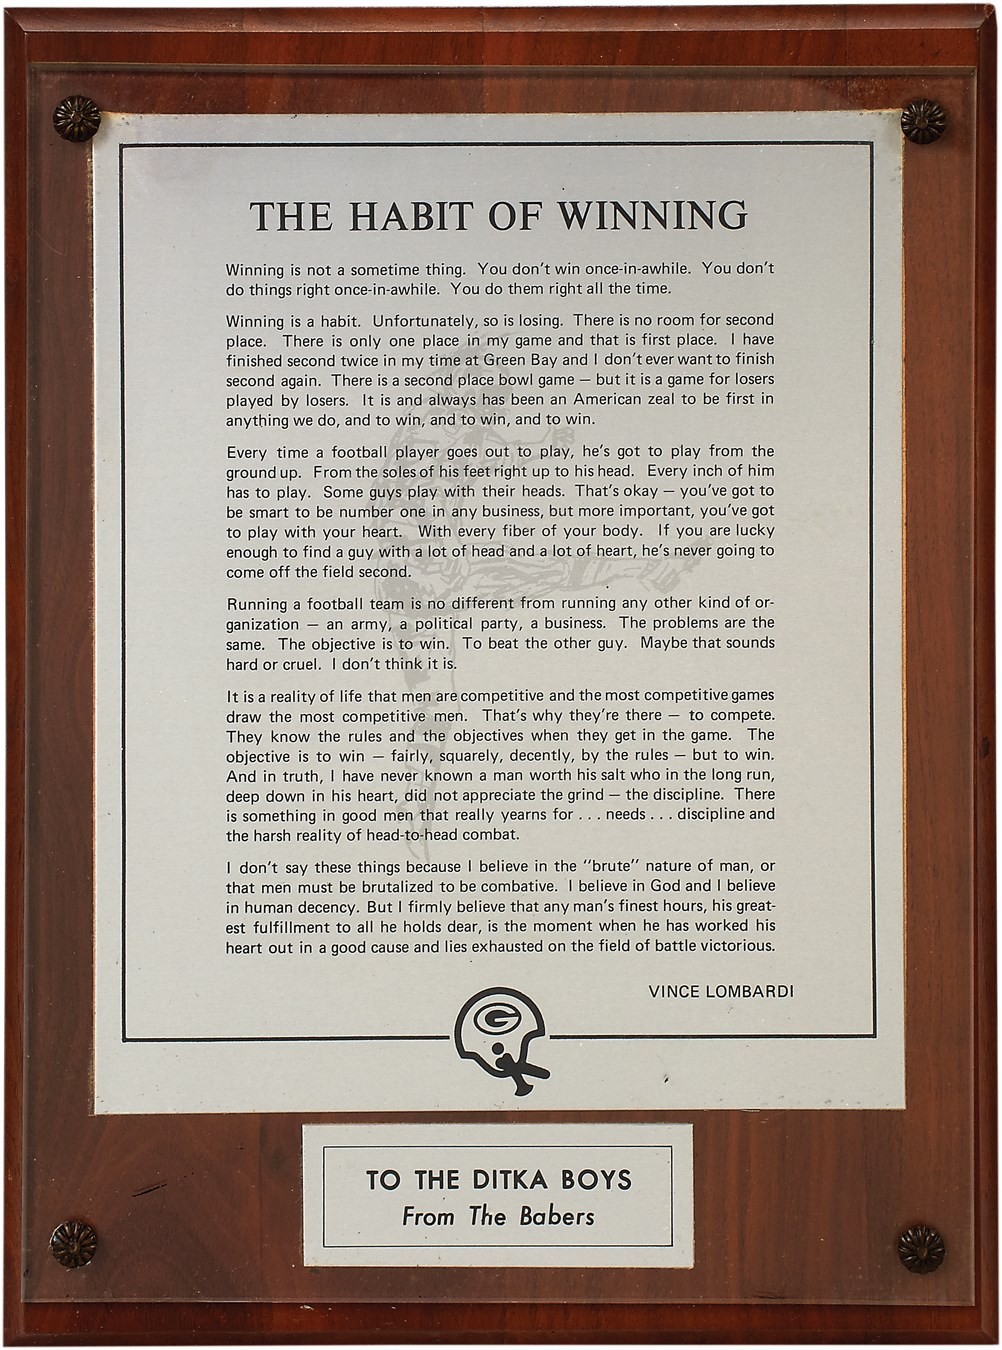 Vince Lombardi "The Habit of Winning" Declaration to Mike Ditka